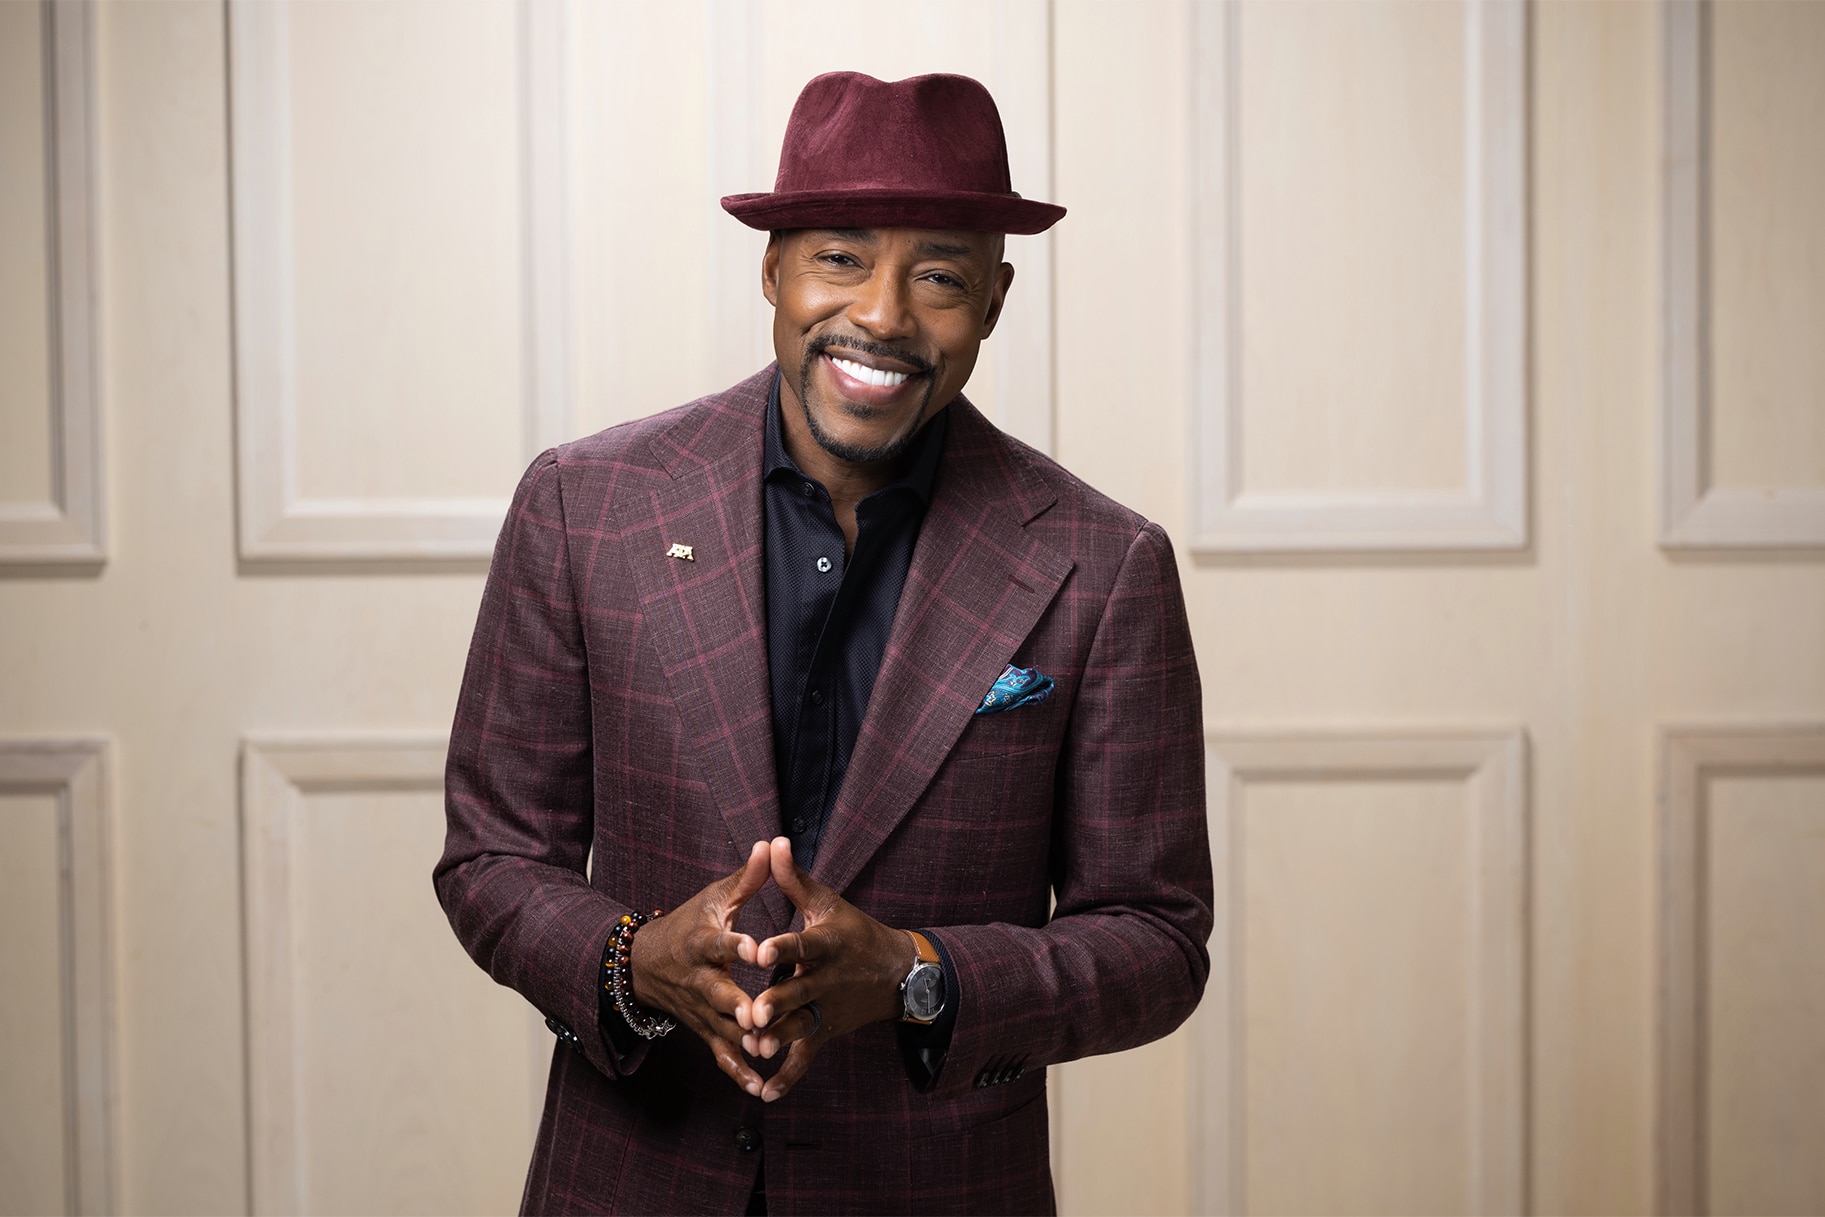 A headshot of Will Packer wearing a purple had and suit